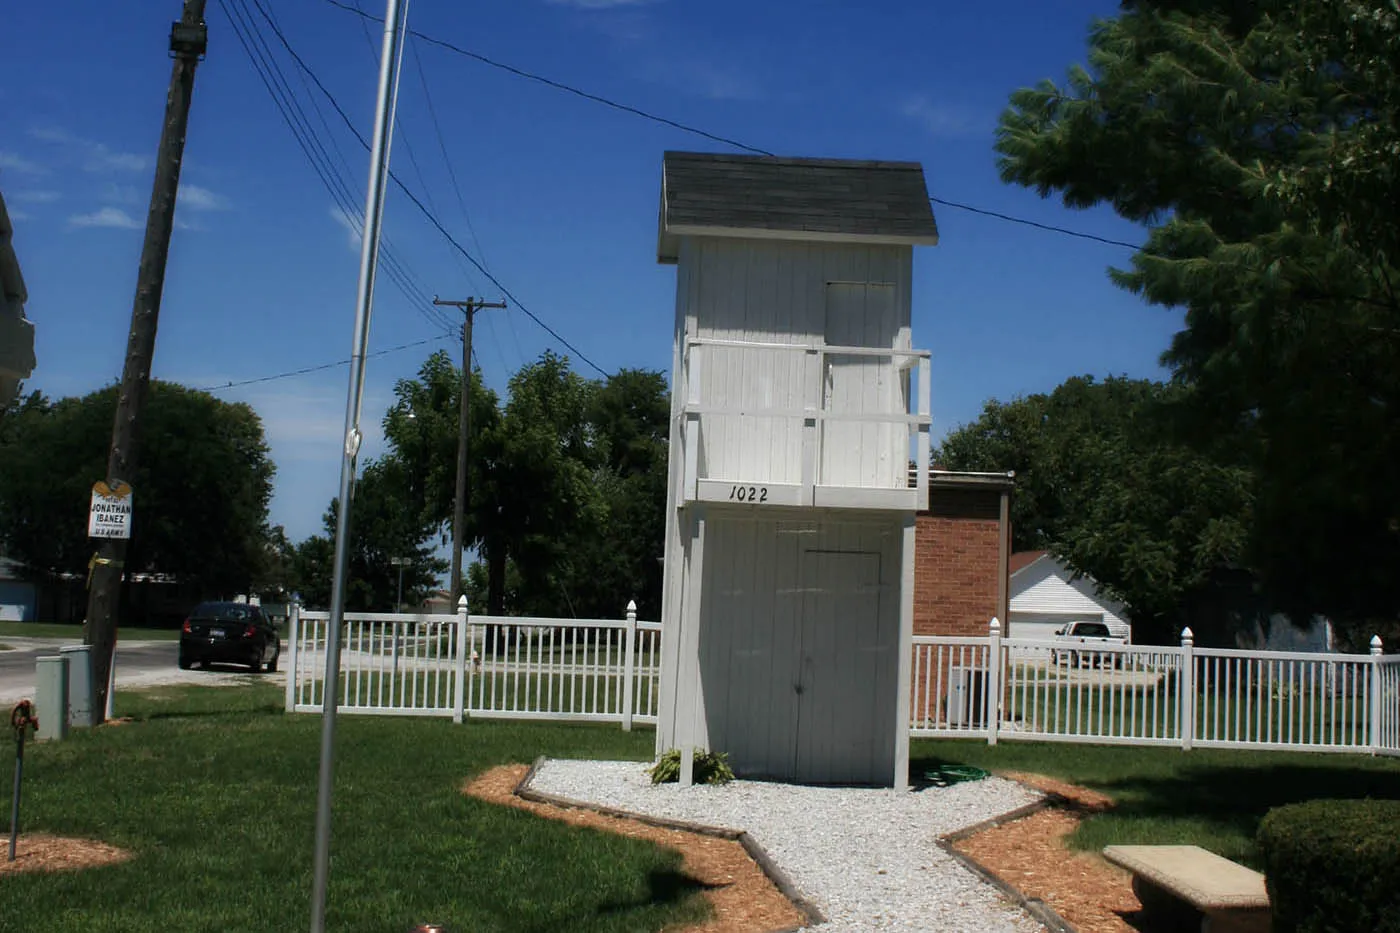 Best Illinois roadside attractions: Two-Story Outhouse in Gays, Illinois. Visit this roadside attraction on an Illinois road trip with kids or weekend getaway with friends. Add the Two Story Outhouse to your road trip bucket list and visit them on your next travel adventure.